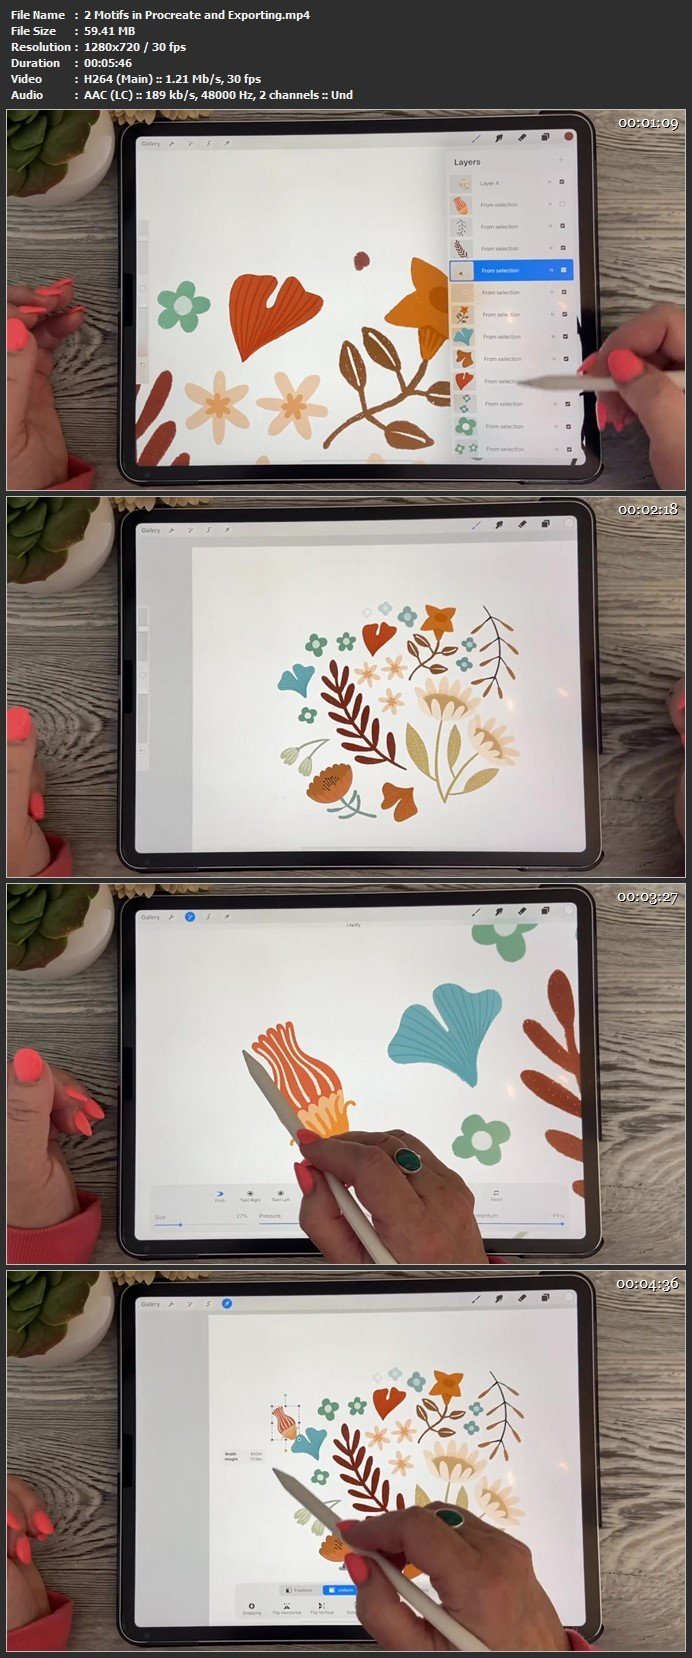 The New Pattern Preview in Photoshop 2021 - Using Pattern Preview to Arrange Procreate Drawn Motifs